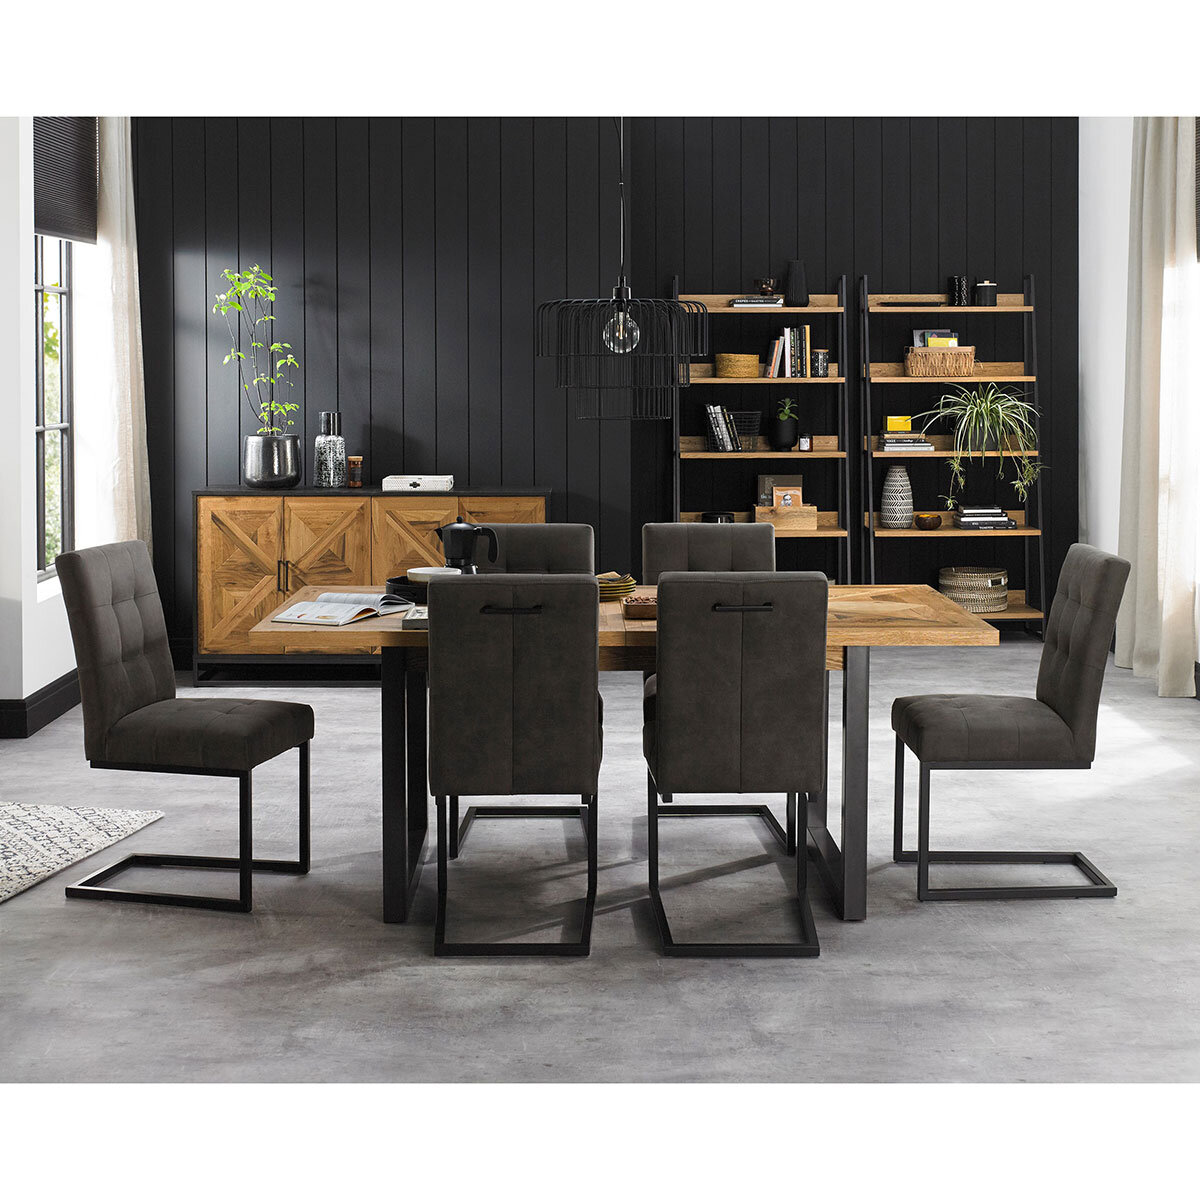 Bentley Designs Greenwich Extending Dining Table + 6 Cantilever Chairs, Seats 6-8